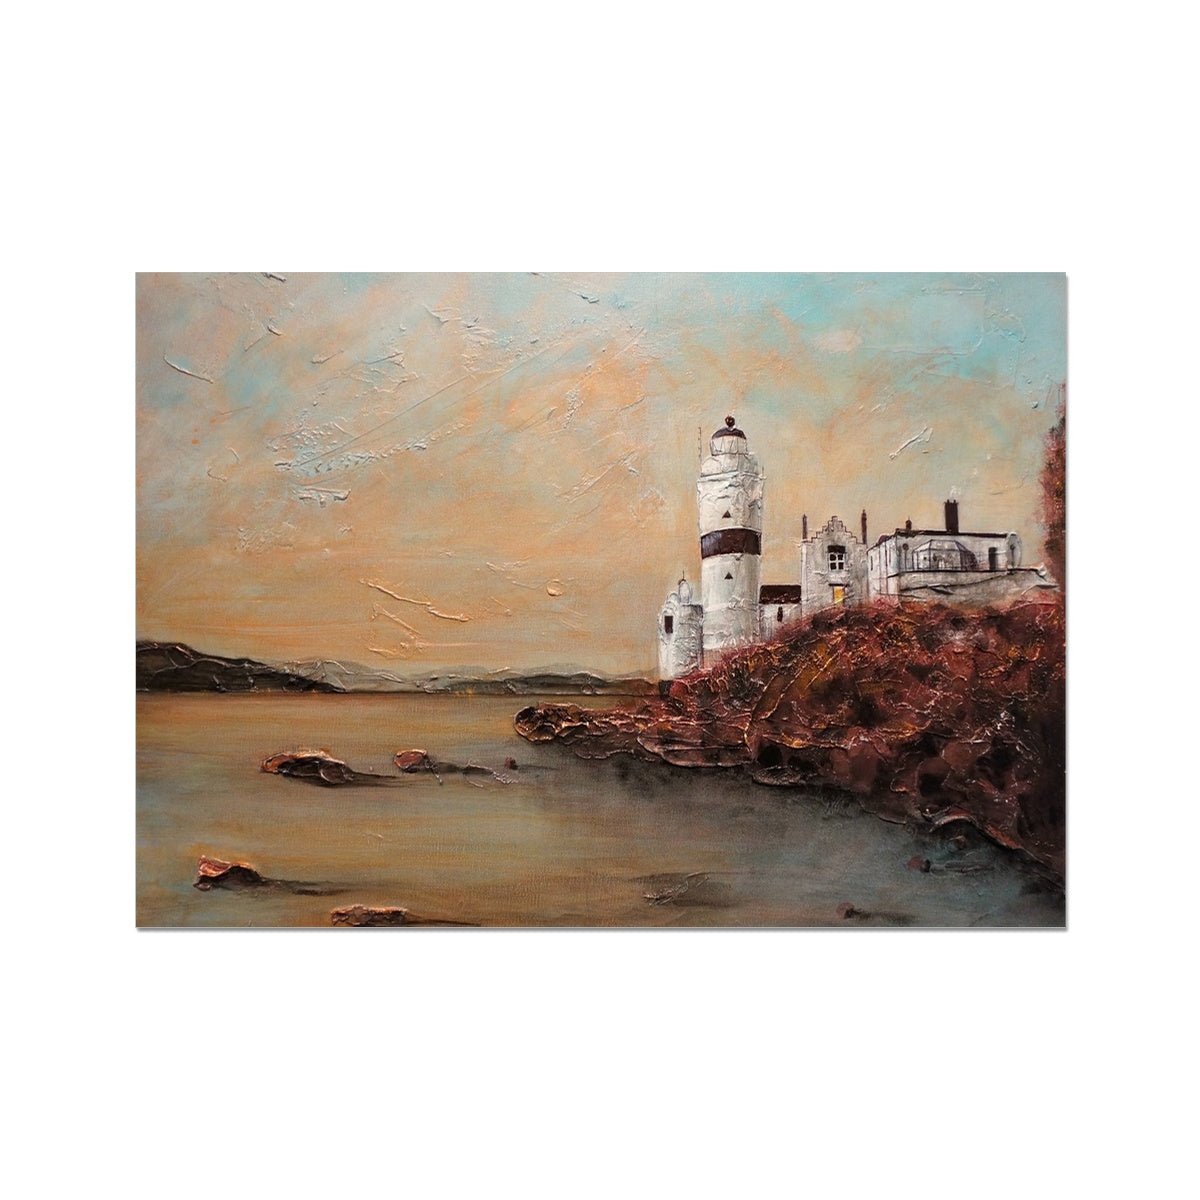 Cloch Lighthouse Dawn Painting | Fine Art Prints From Scotland-Unframed Prints-River Clyde Art Gallery-A2 Landscape-Paintings, Prints, Homeware, Art Gifts From Scotland By Scottish Artist Kevin Hunter